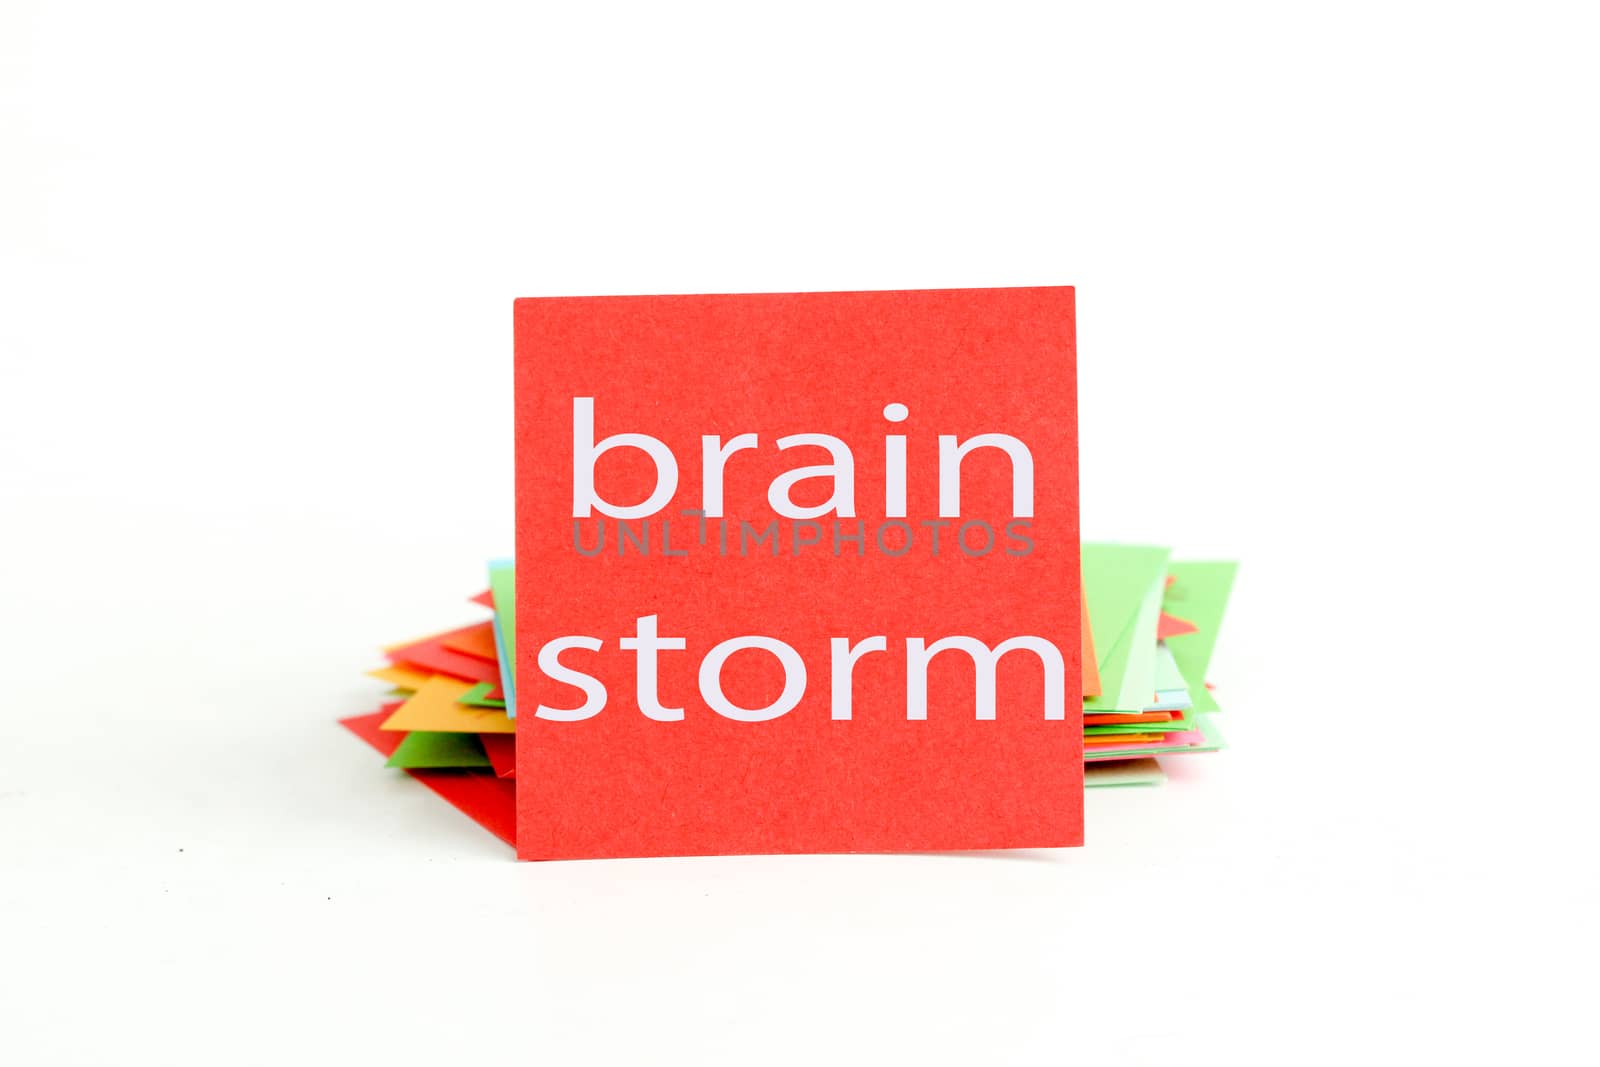 picture of a red note paper with text brain storm